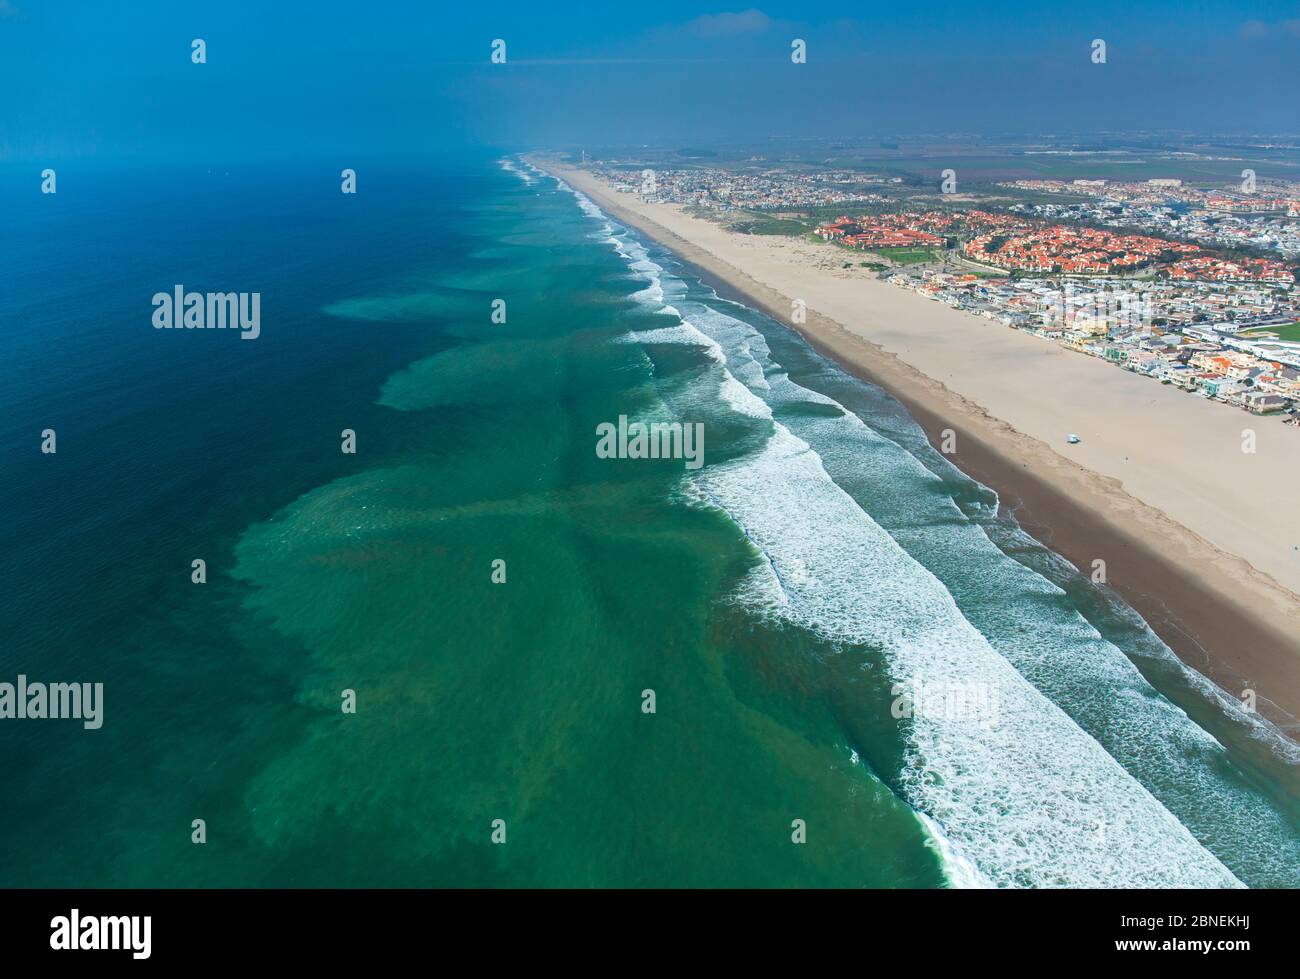 Aerial view of the city of Oxnard and beach front, Ventura County, California, USA, February 2015. Stock Photo